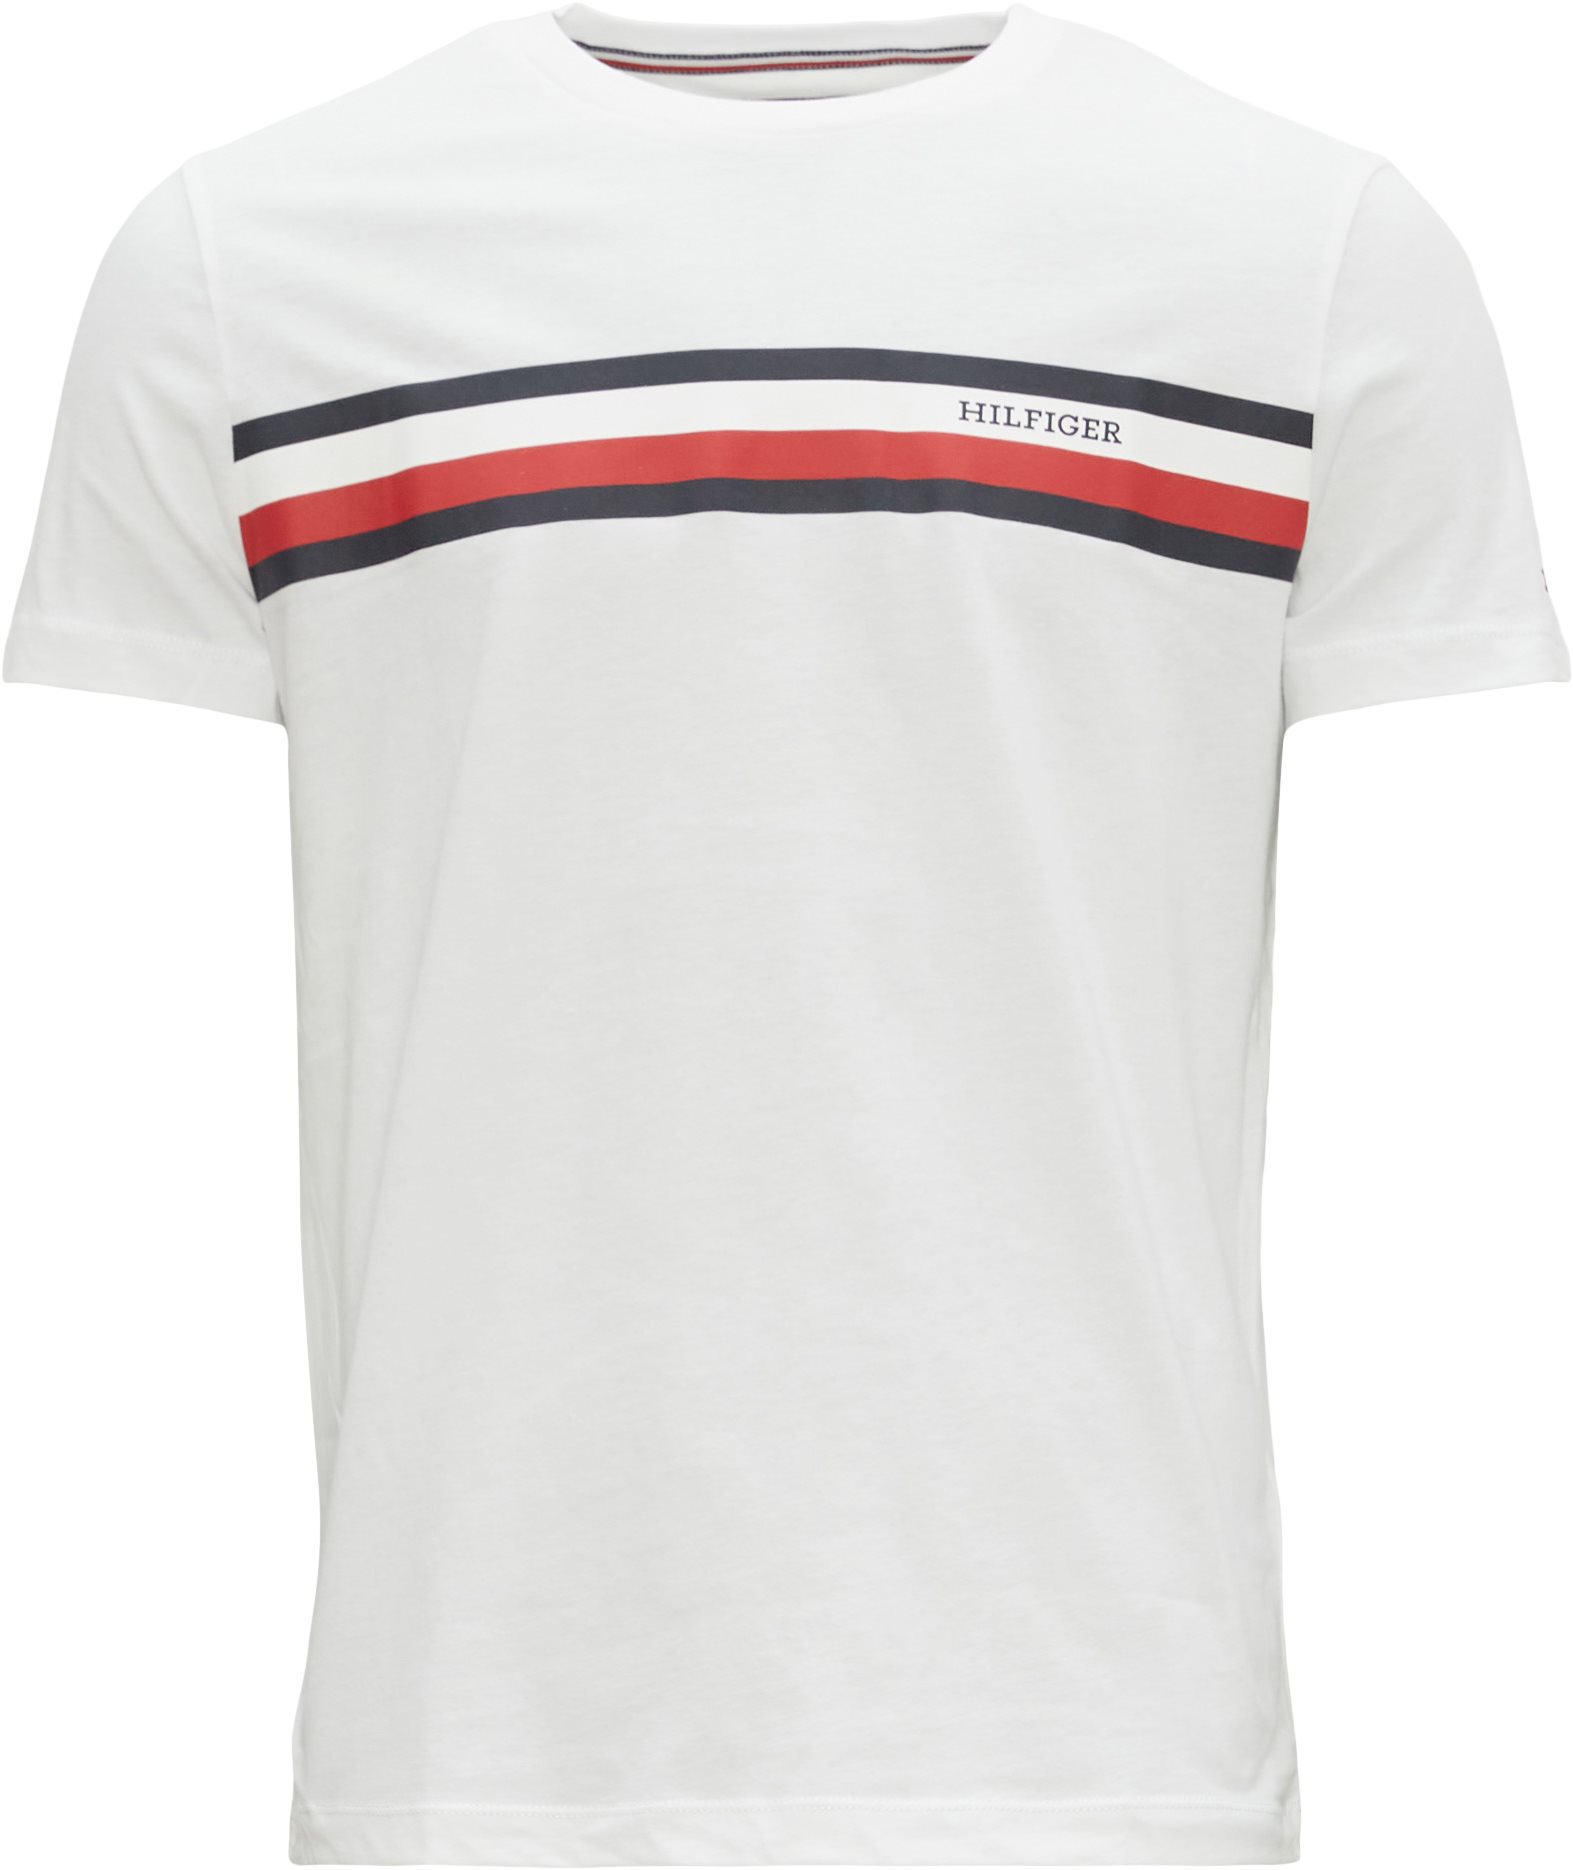 MONOTYPE Tommy from STRIPE 40 Hilfiger 32119 CHEST HVID RWB EUR T-shirts